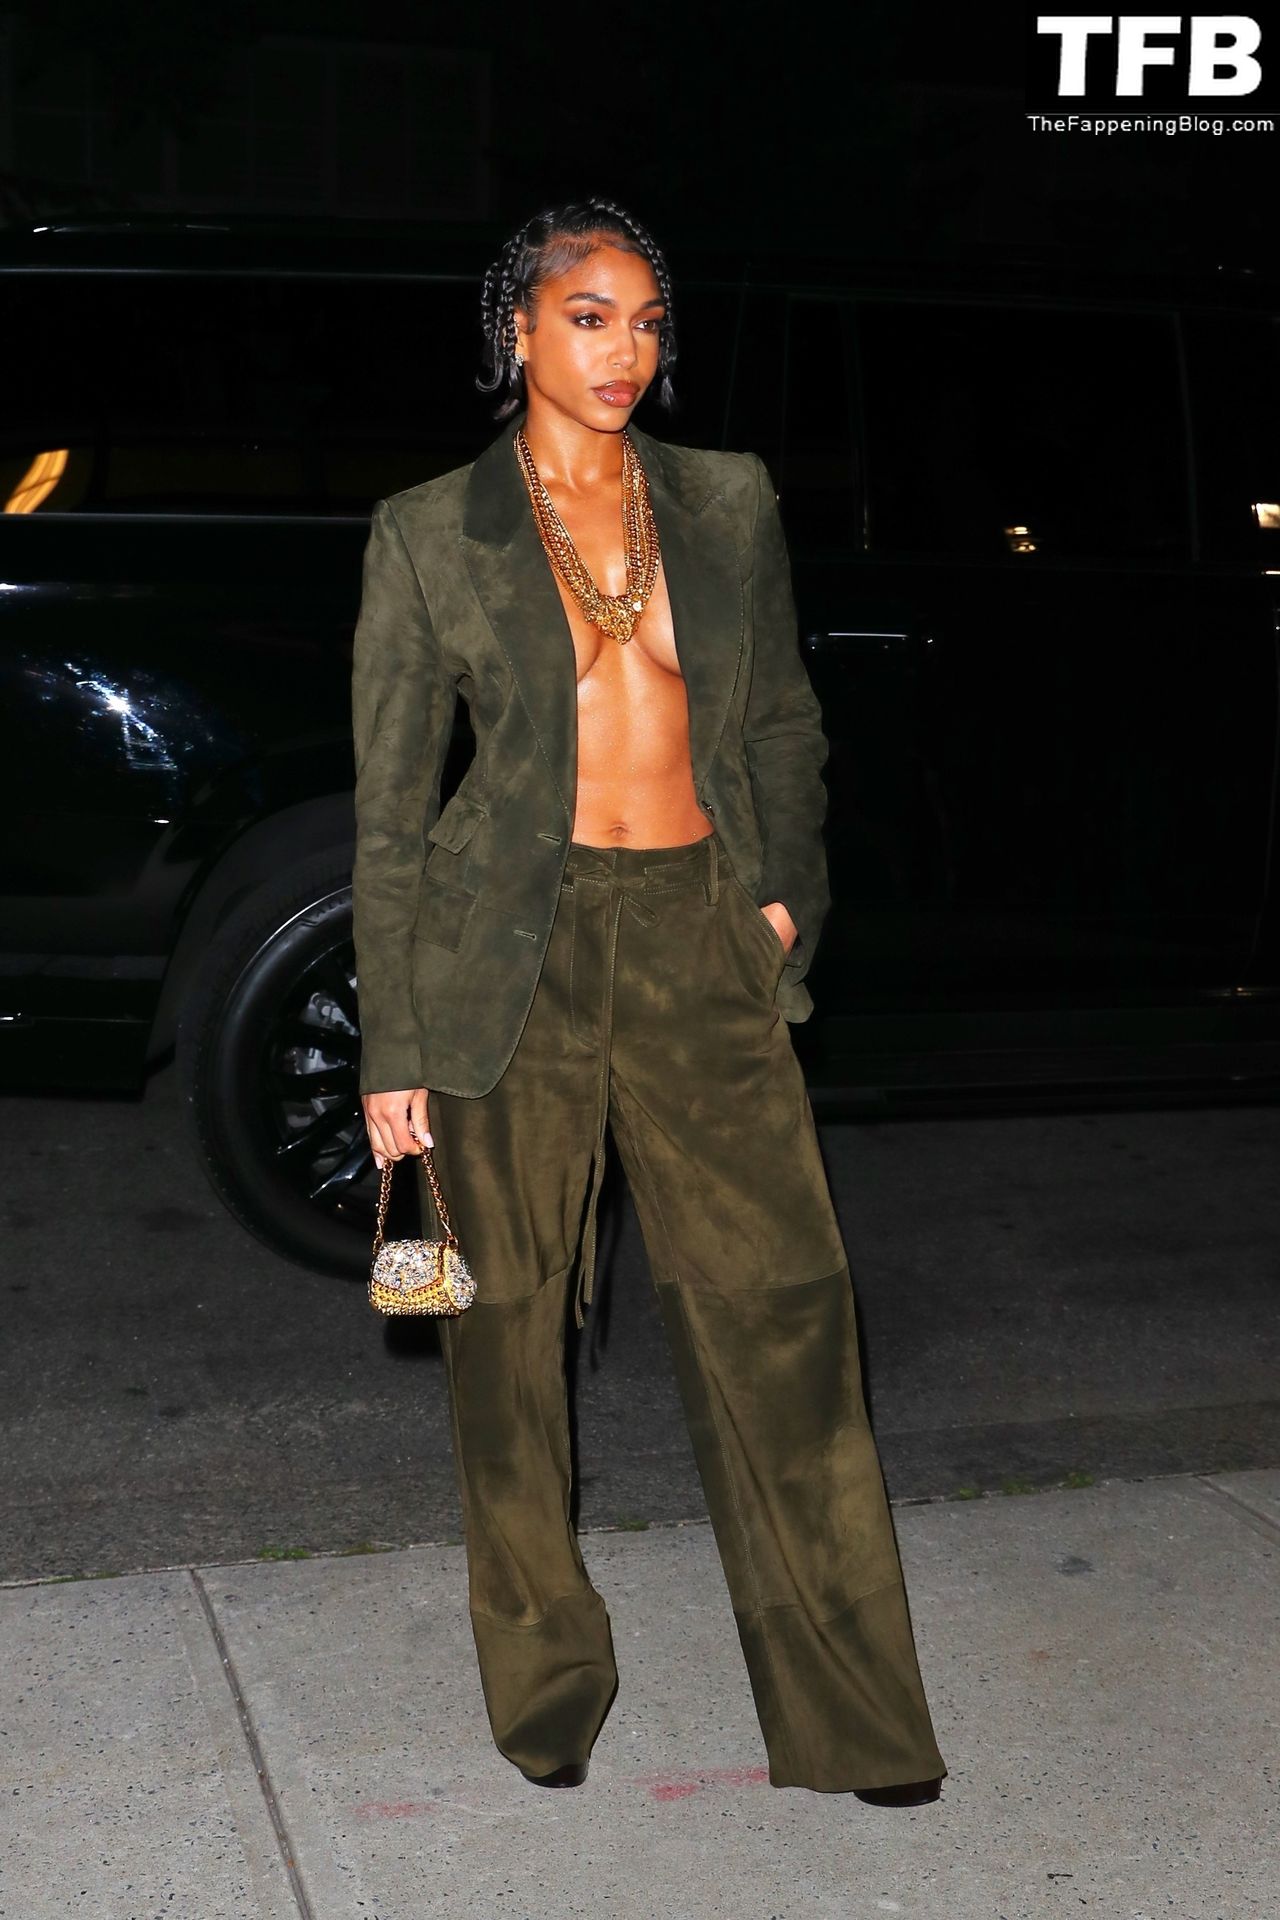 Lori Harvey Sexy The Fappening Blog 19 - Lori Harvey Shows Off Her Tits at the Tom Ford Fashion Show (38 Photos)